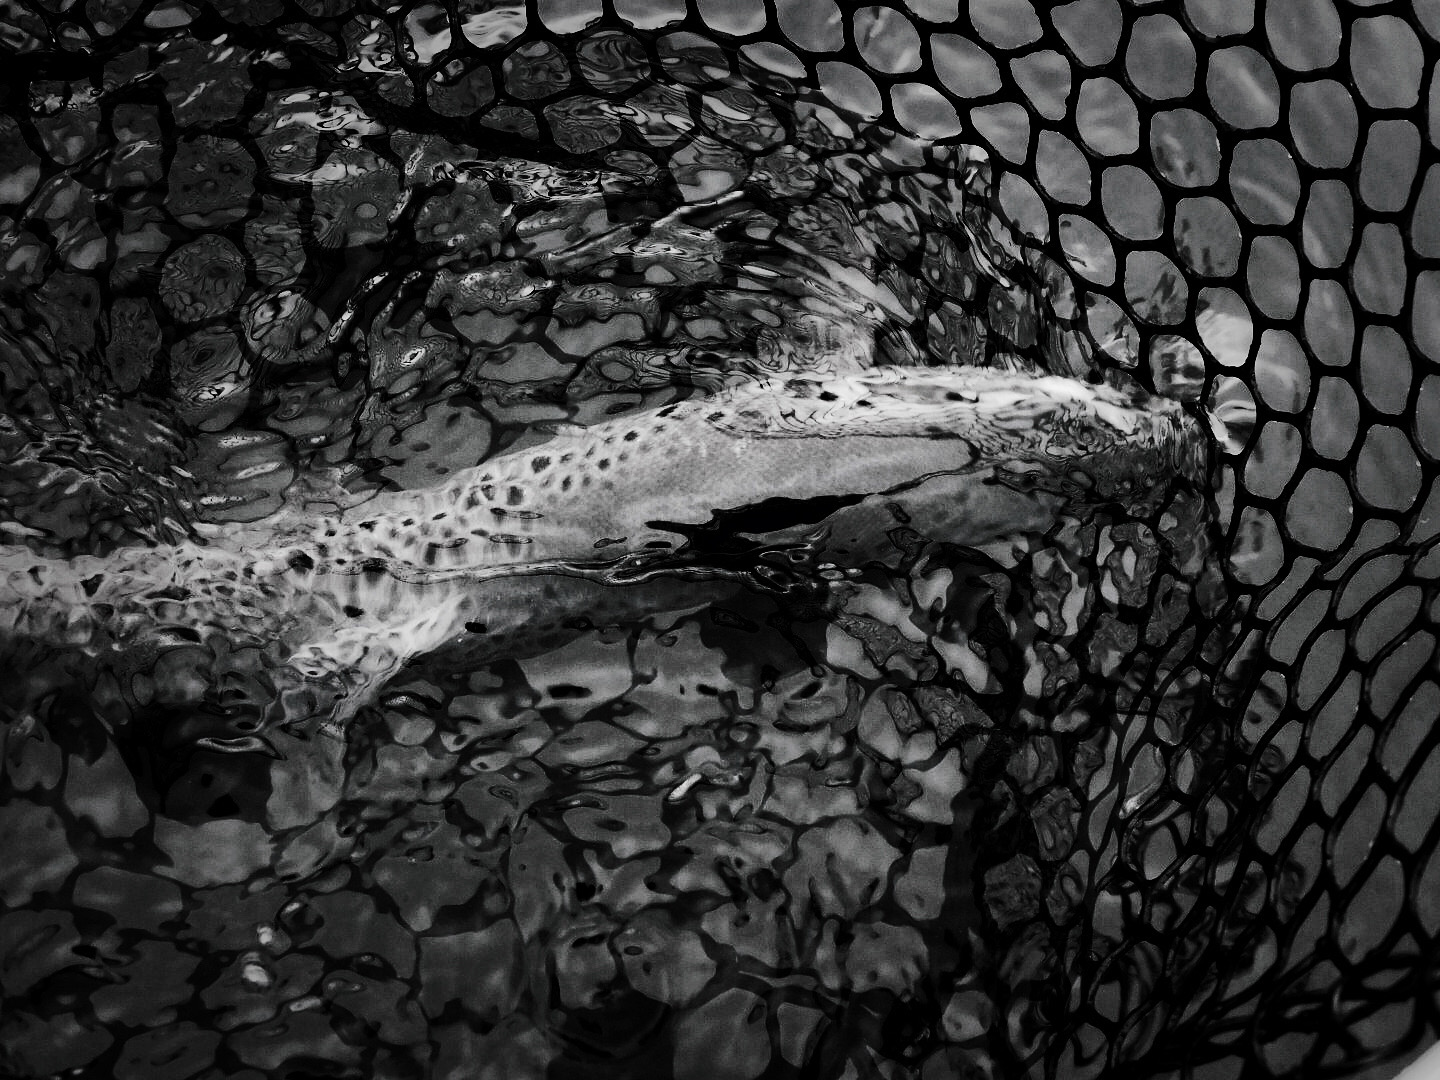 Close-up of a trout in a fishing net, partially submerged in water.